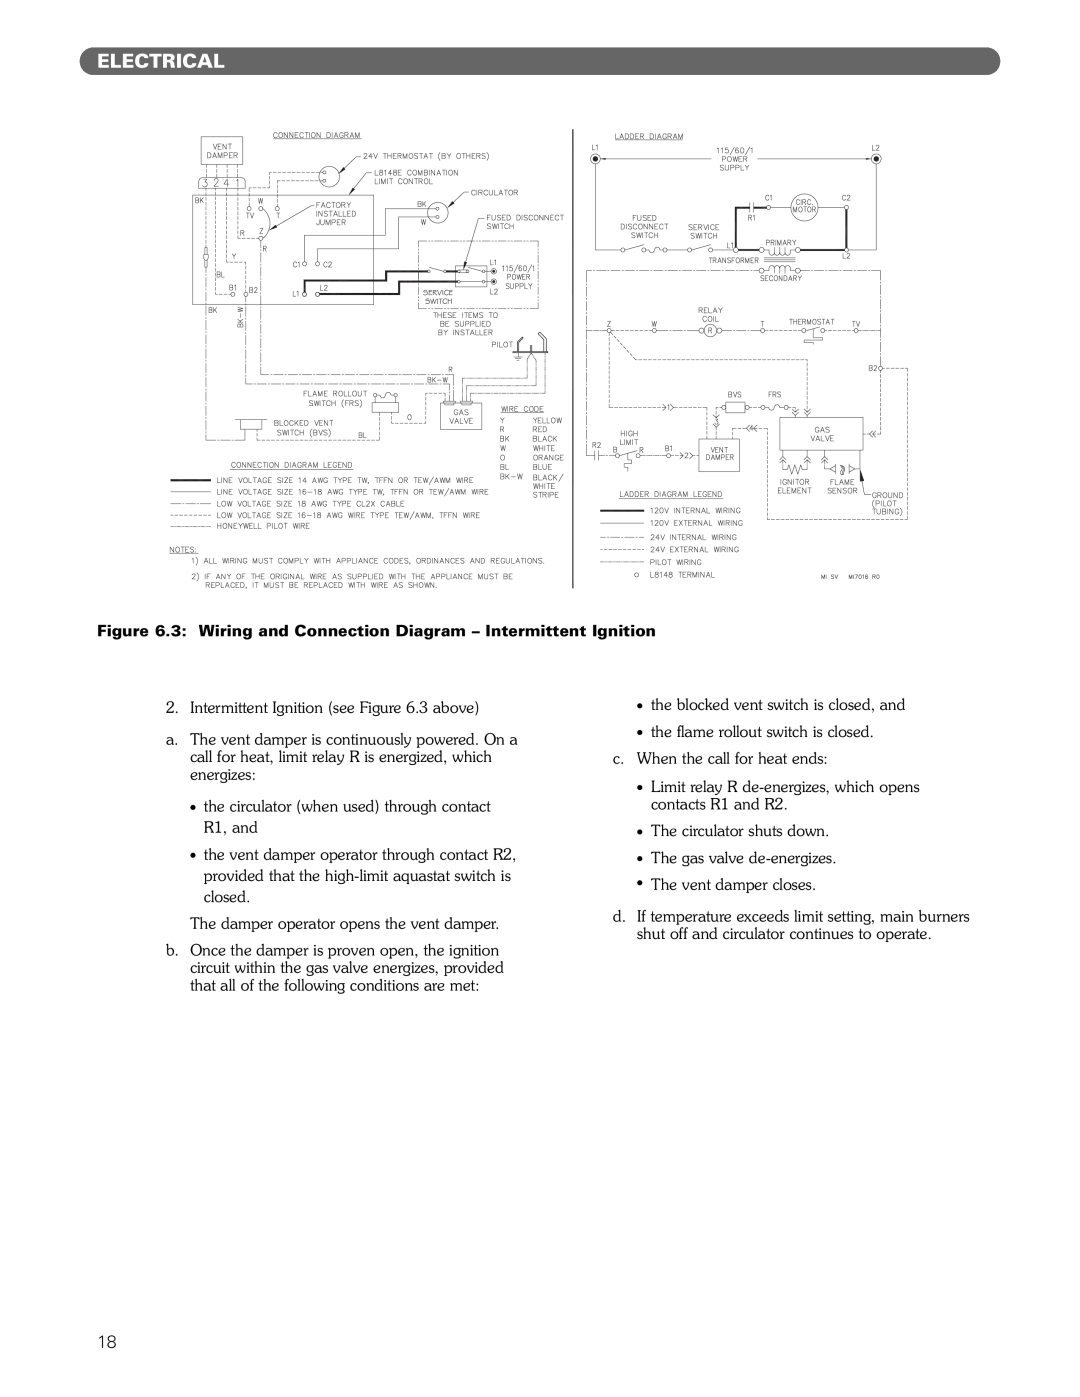 PB Heat MI/MIH series manual Electrical, Intermittent Ignition see .3 above 